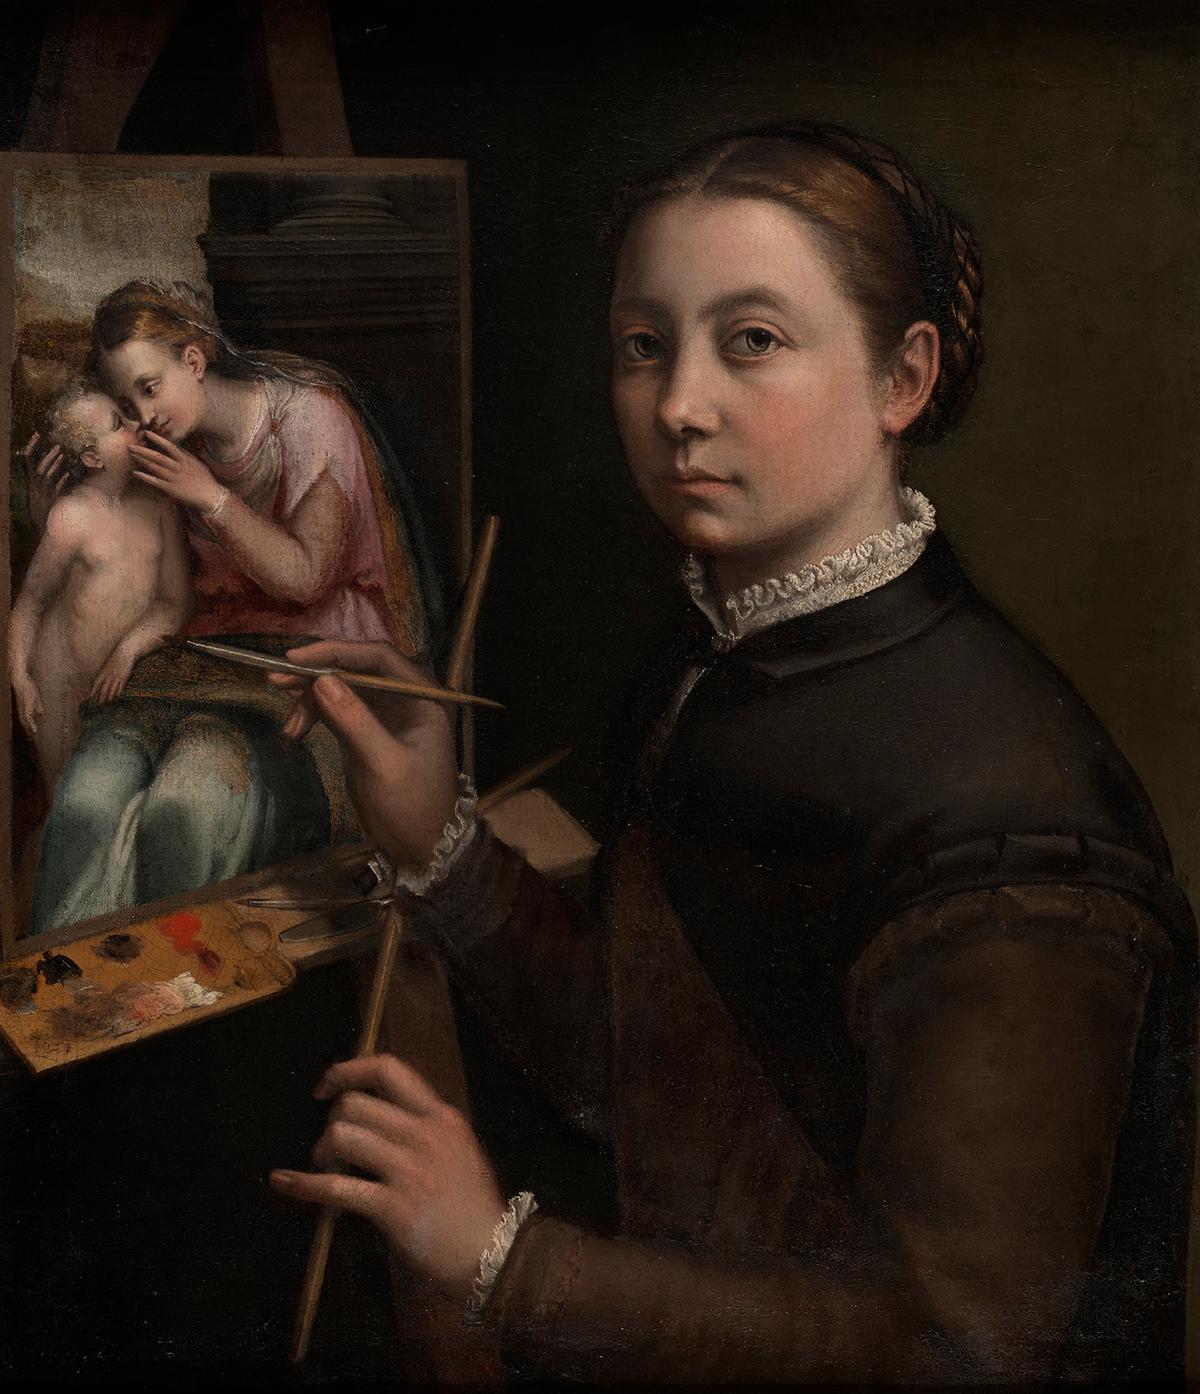 "Self-Portrait at the Easel," 1556, by Sofonisba Anguissola. Oil on canvas; 25 7/8 inches by 22 3/8 inches. Lancut Castle, Poland. (Public Domain)